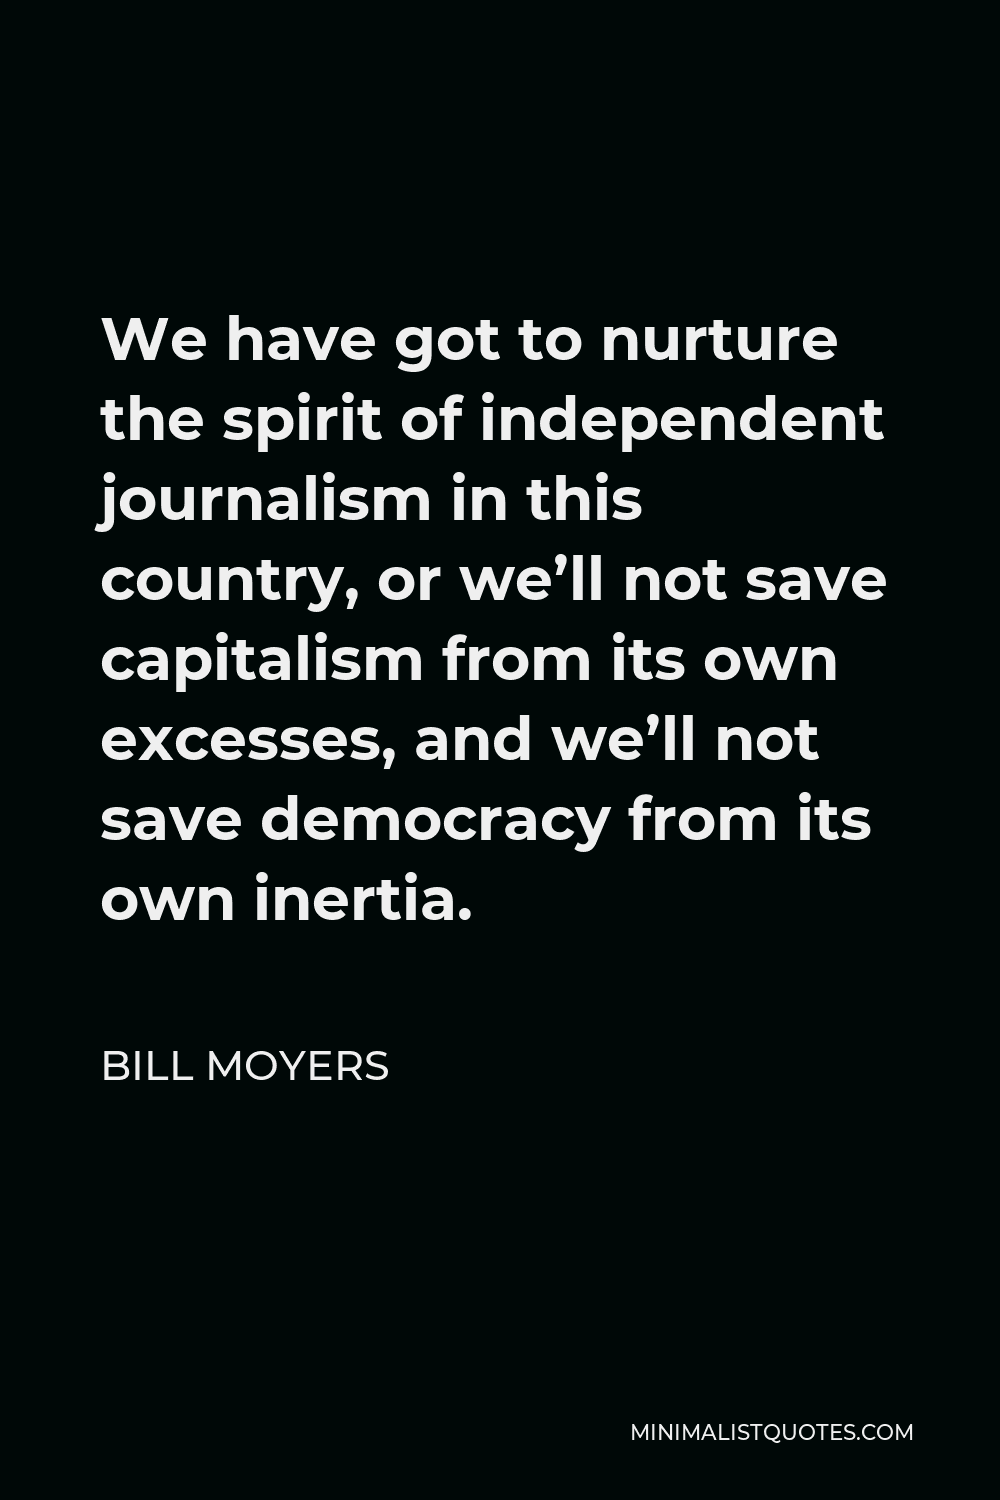 Bill Moyers Quote - We have got to nurture the spirit of independent journalism in this country, or we’ll not save capitalism from its own excesses, and we’ll not save democracy from its own inertia.